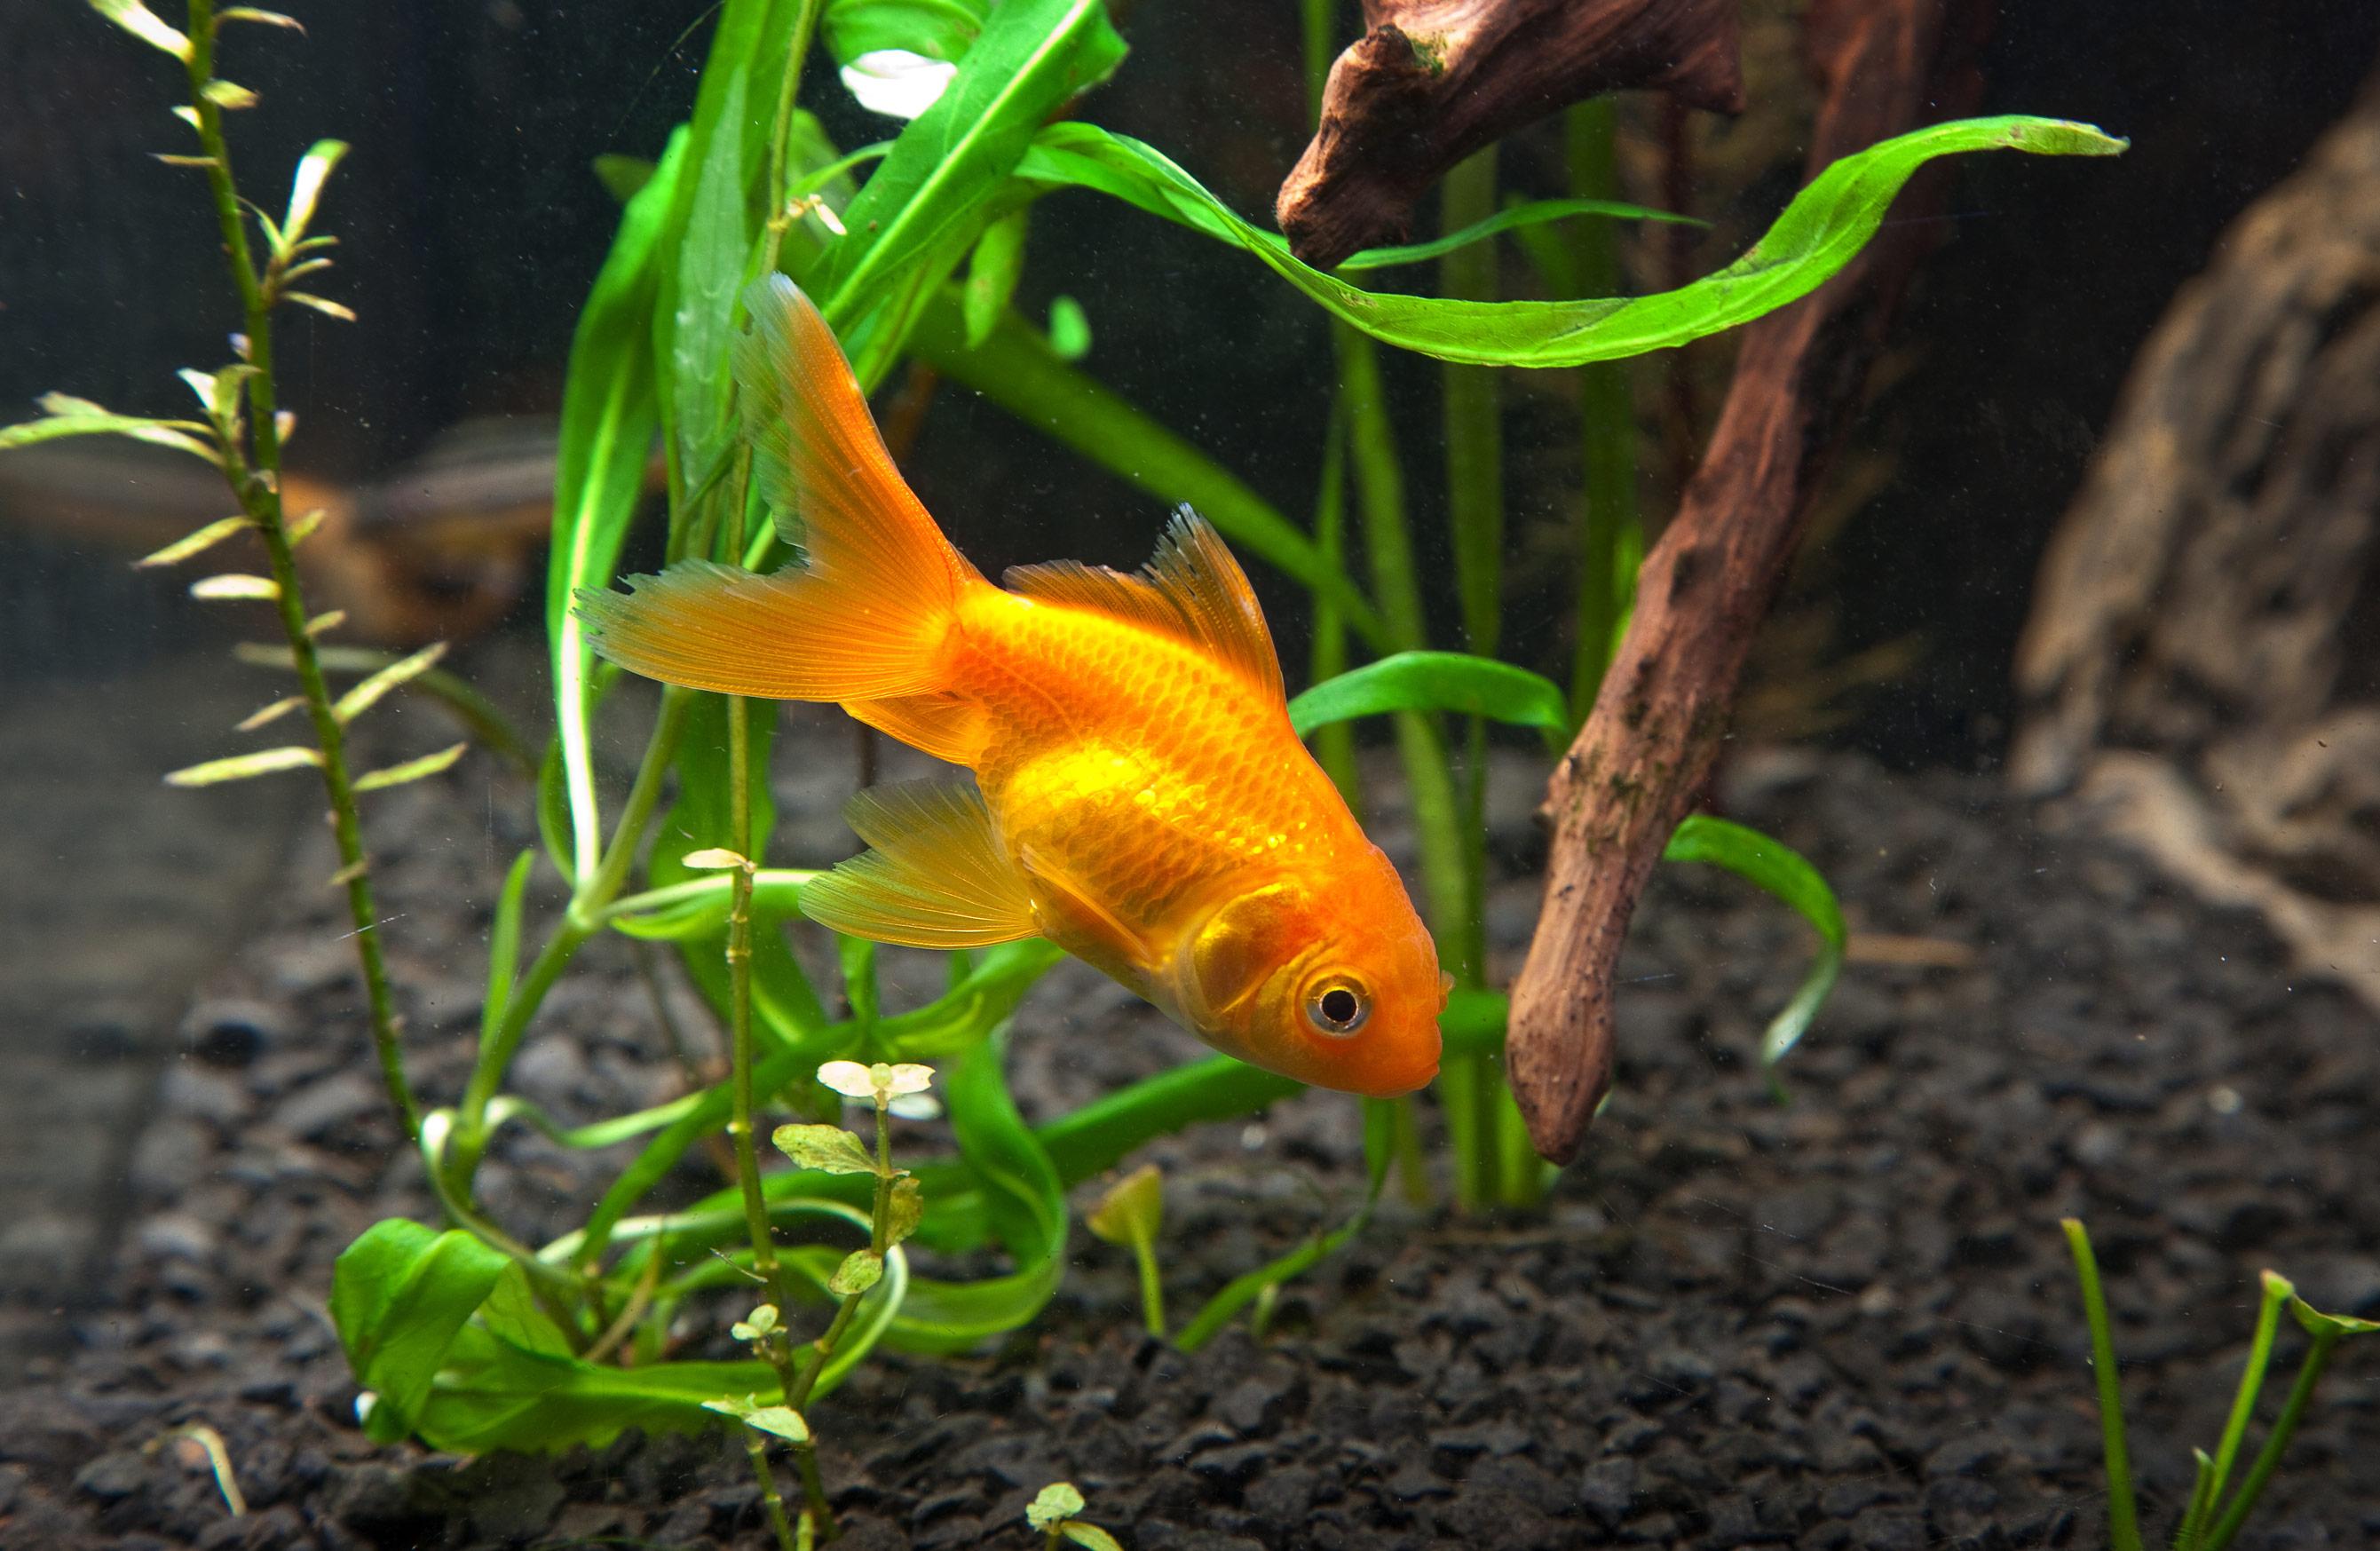 50+ Goldfish wallpapers HD | Download Free backgrounds